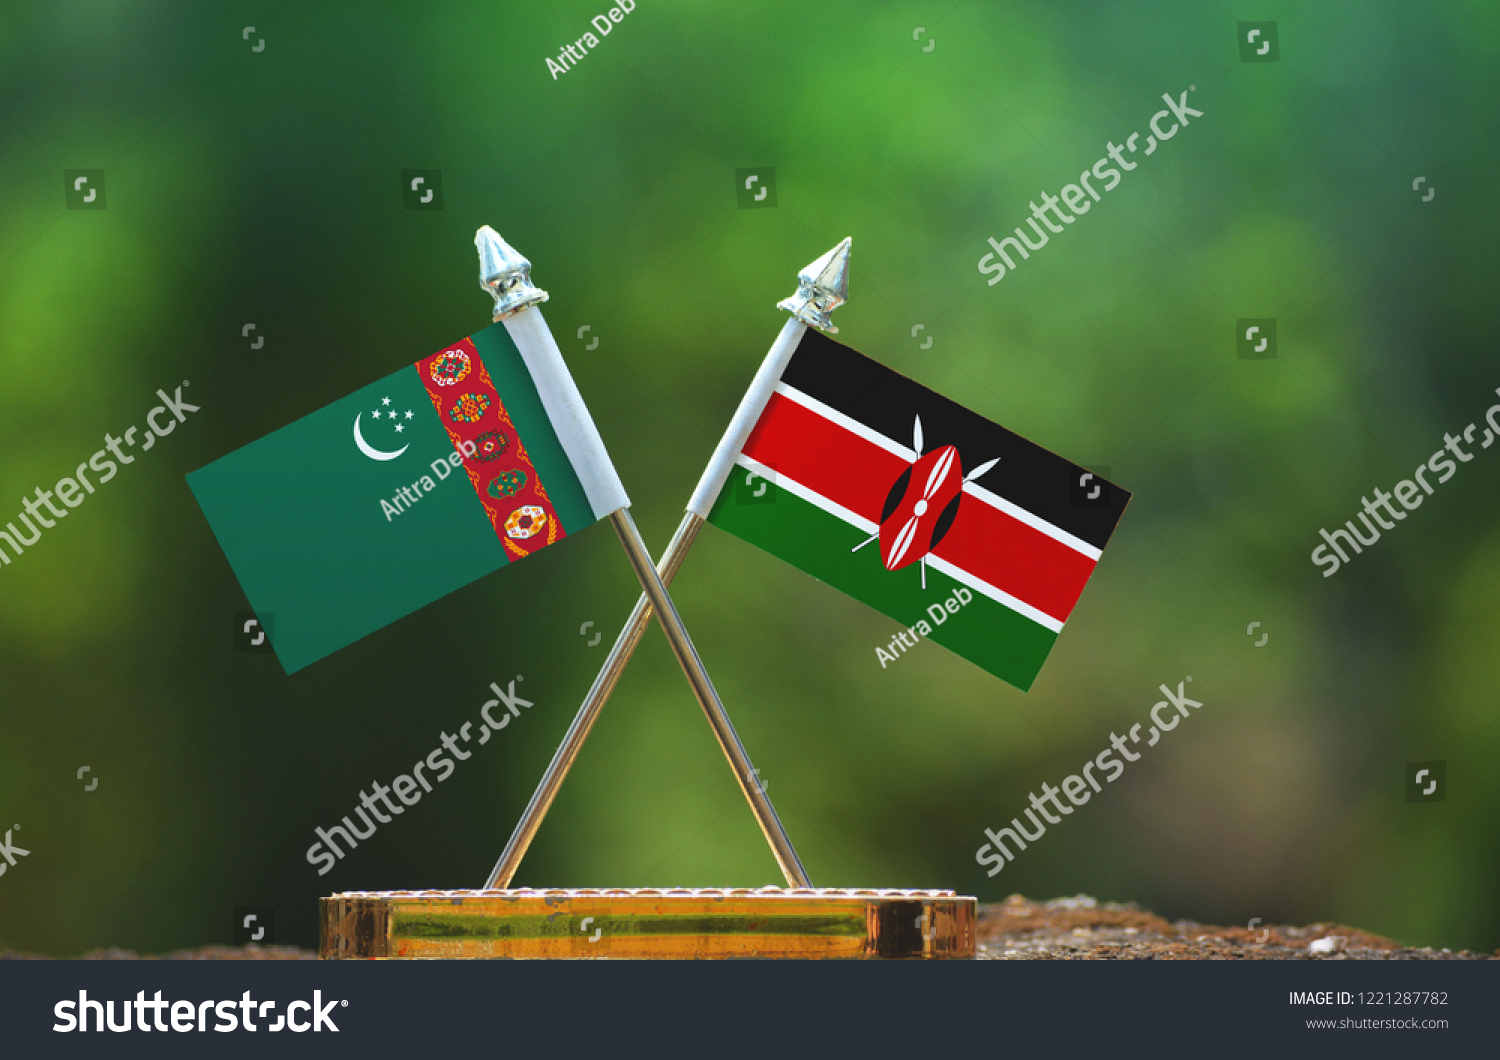 Kenya and Turkmenistan small flag with blur green background #1221287782